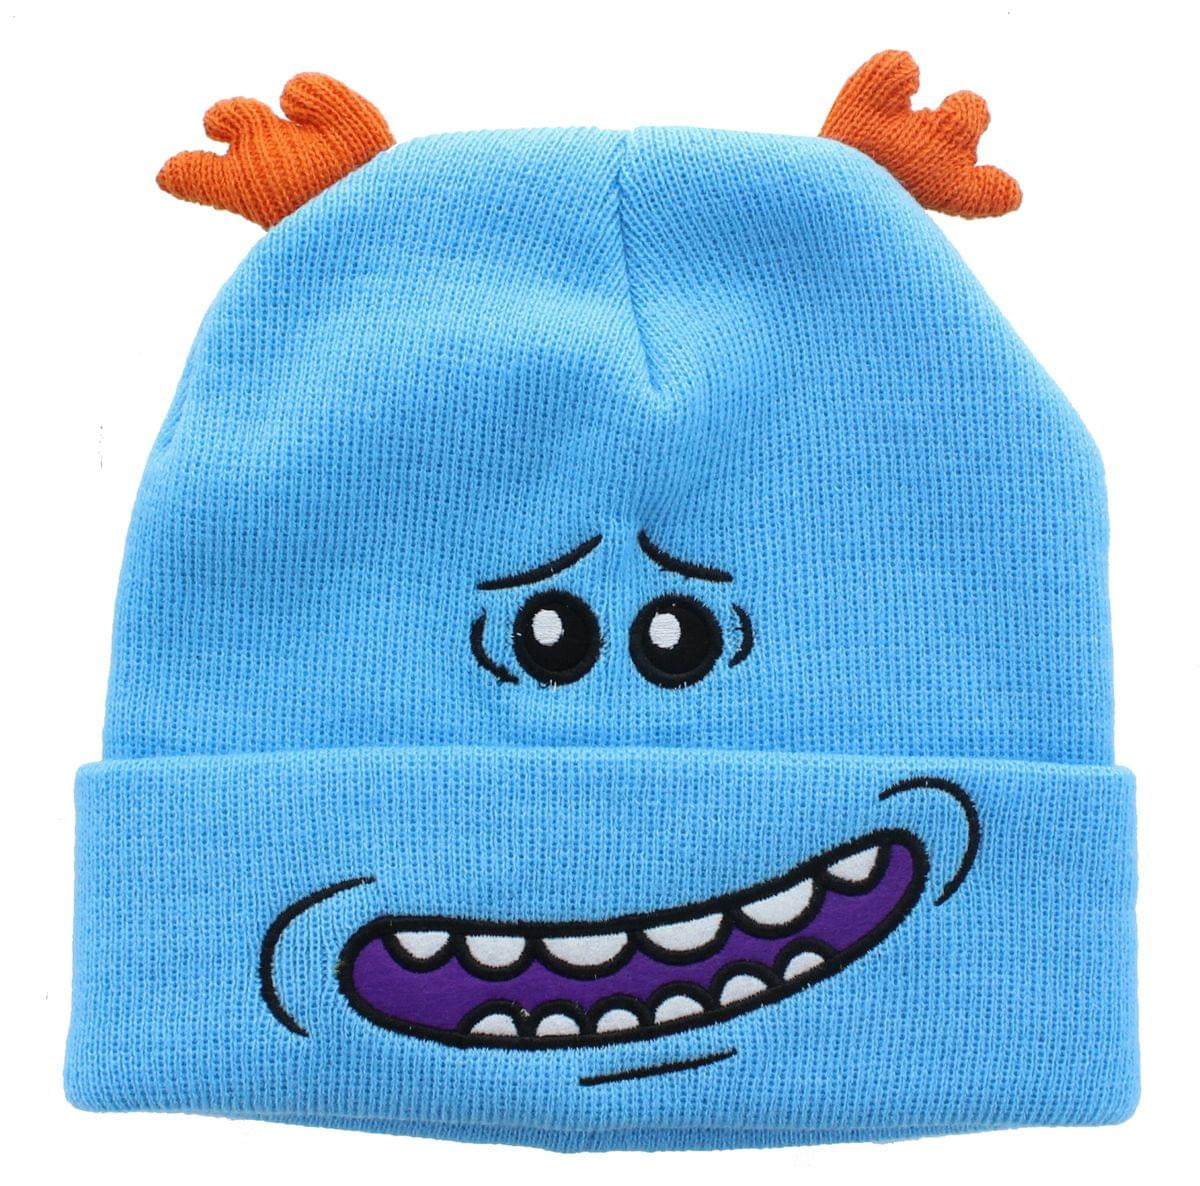 Mr meeseeks Printed Washable Mouth Protective for Skiing Morty & Rick white with 5 filters